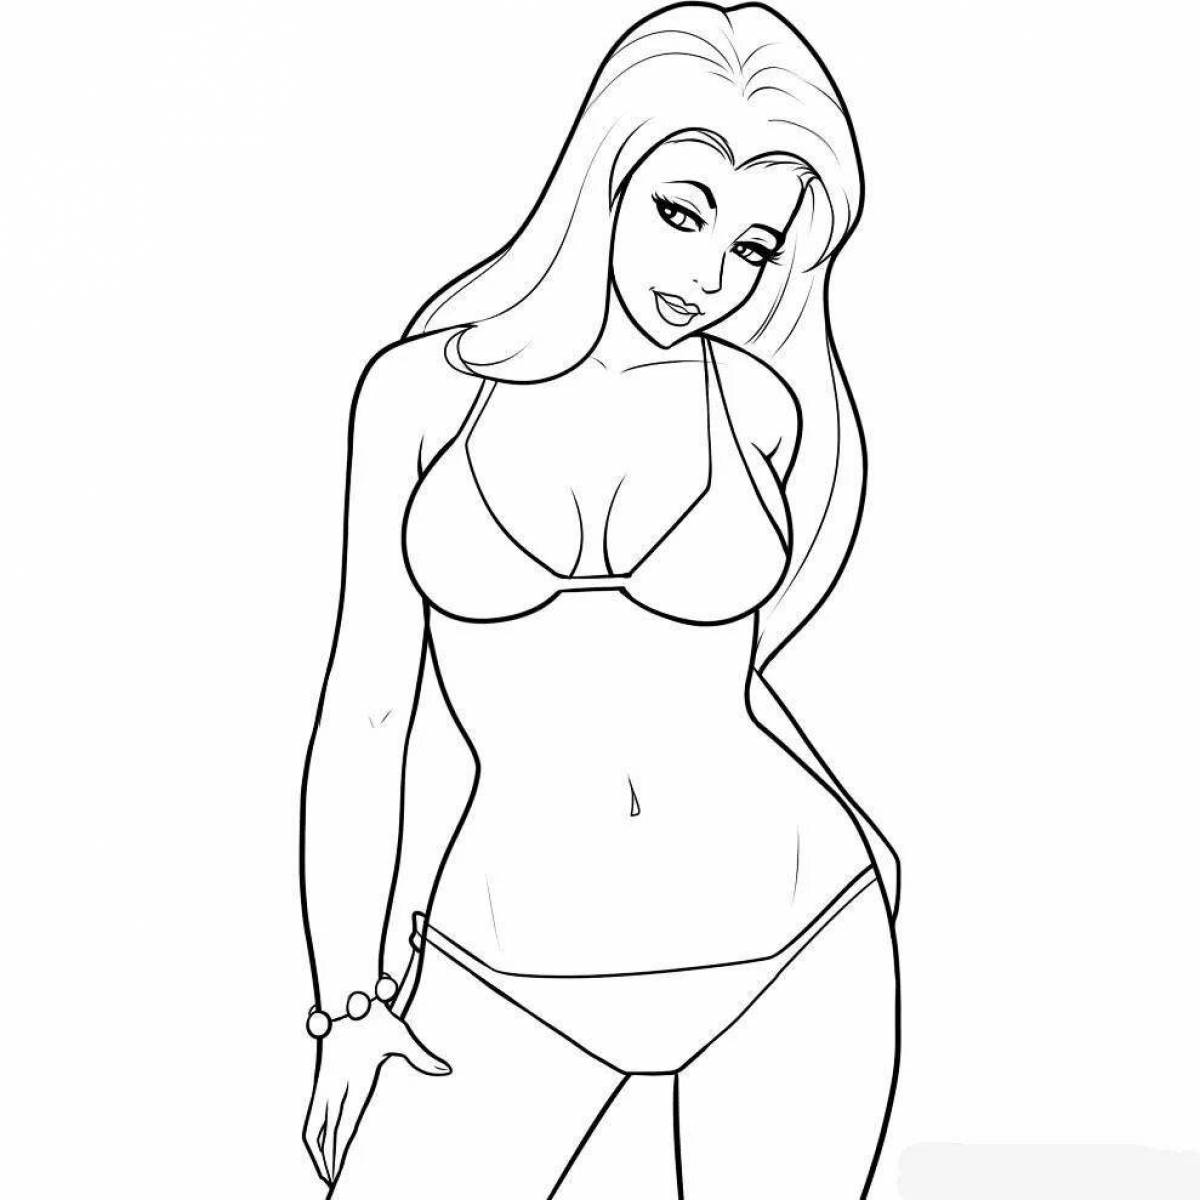 Flirty naked girls coloring page